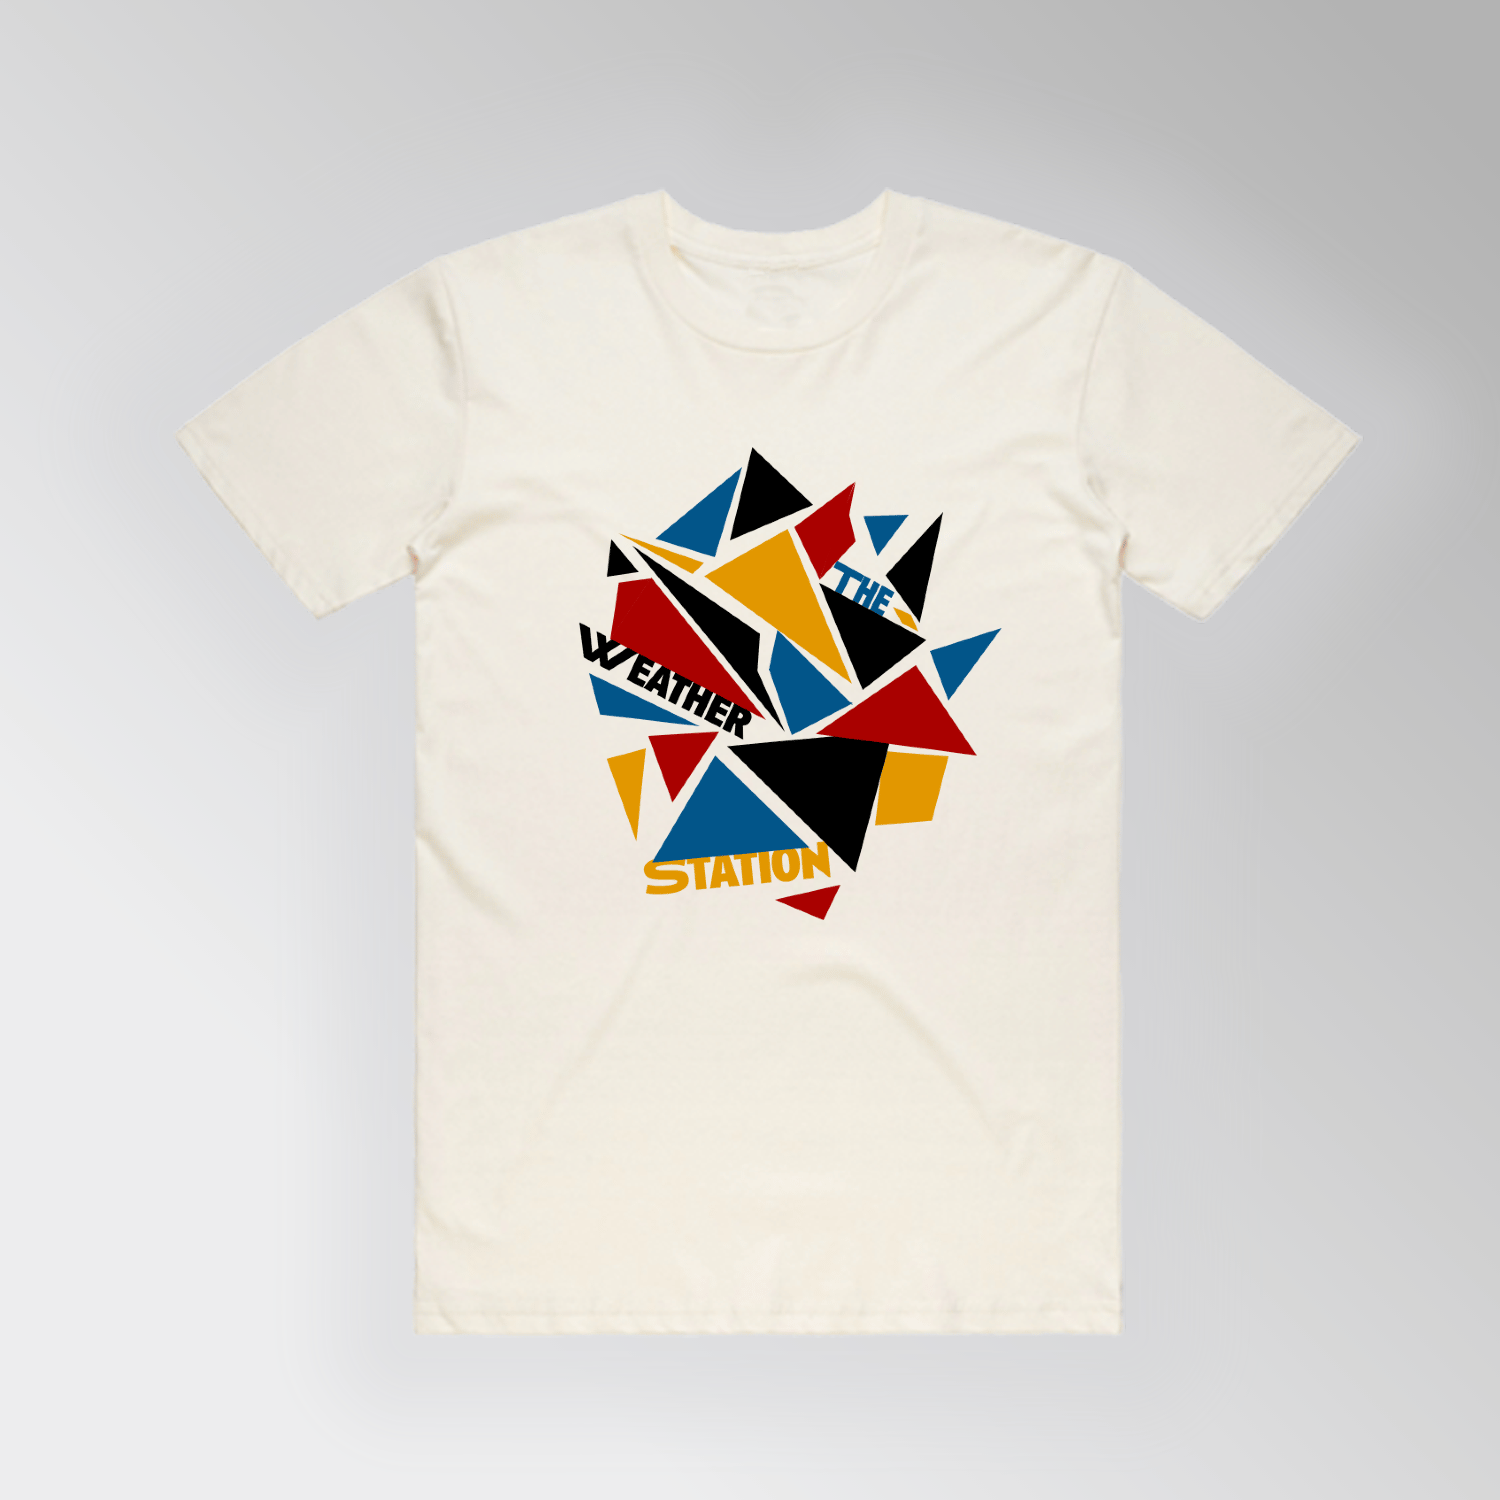 Mirror T-Shirt | The Weather Station Merch Store